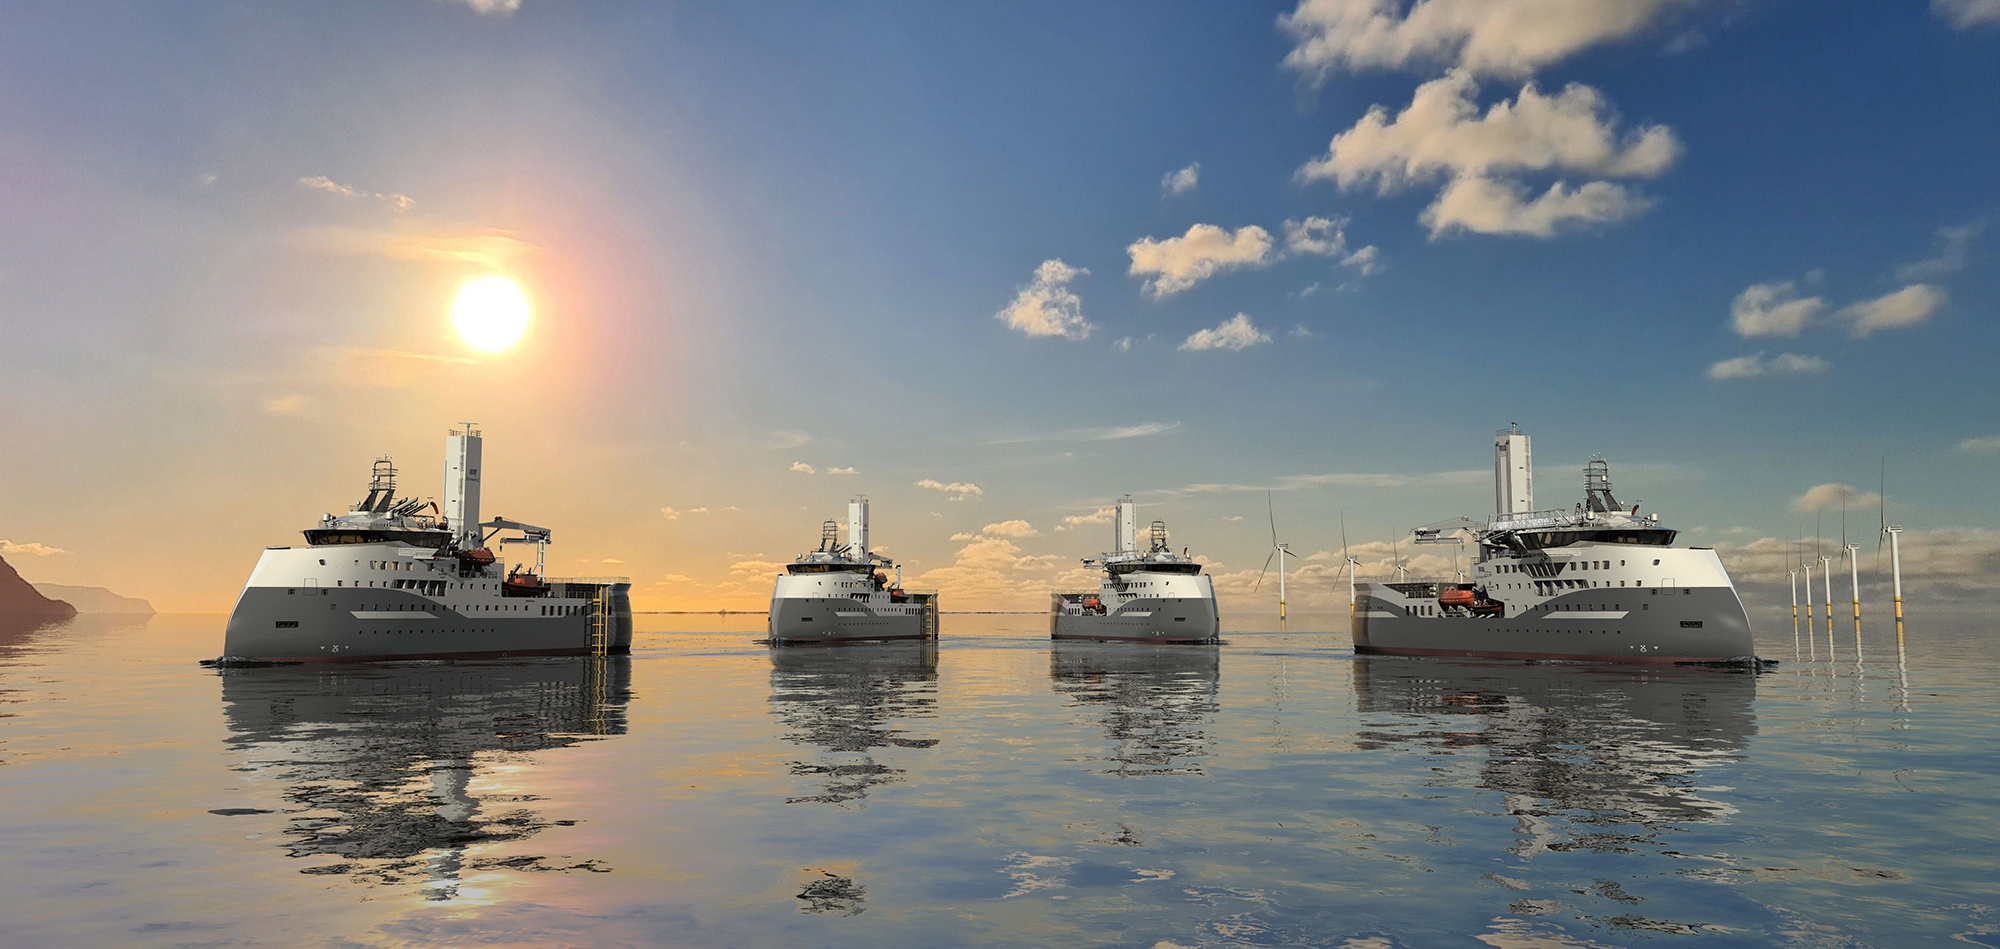 Olympic has ordered 2 (+2) CSOV TWIN X-STERN vessels of Ulstein design.